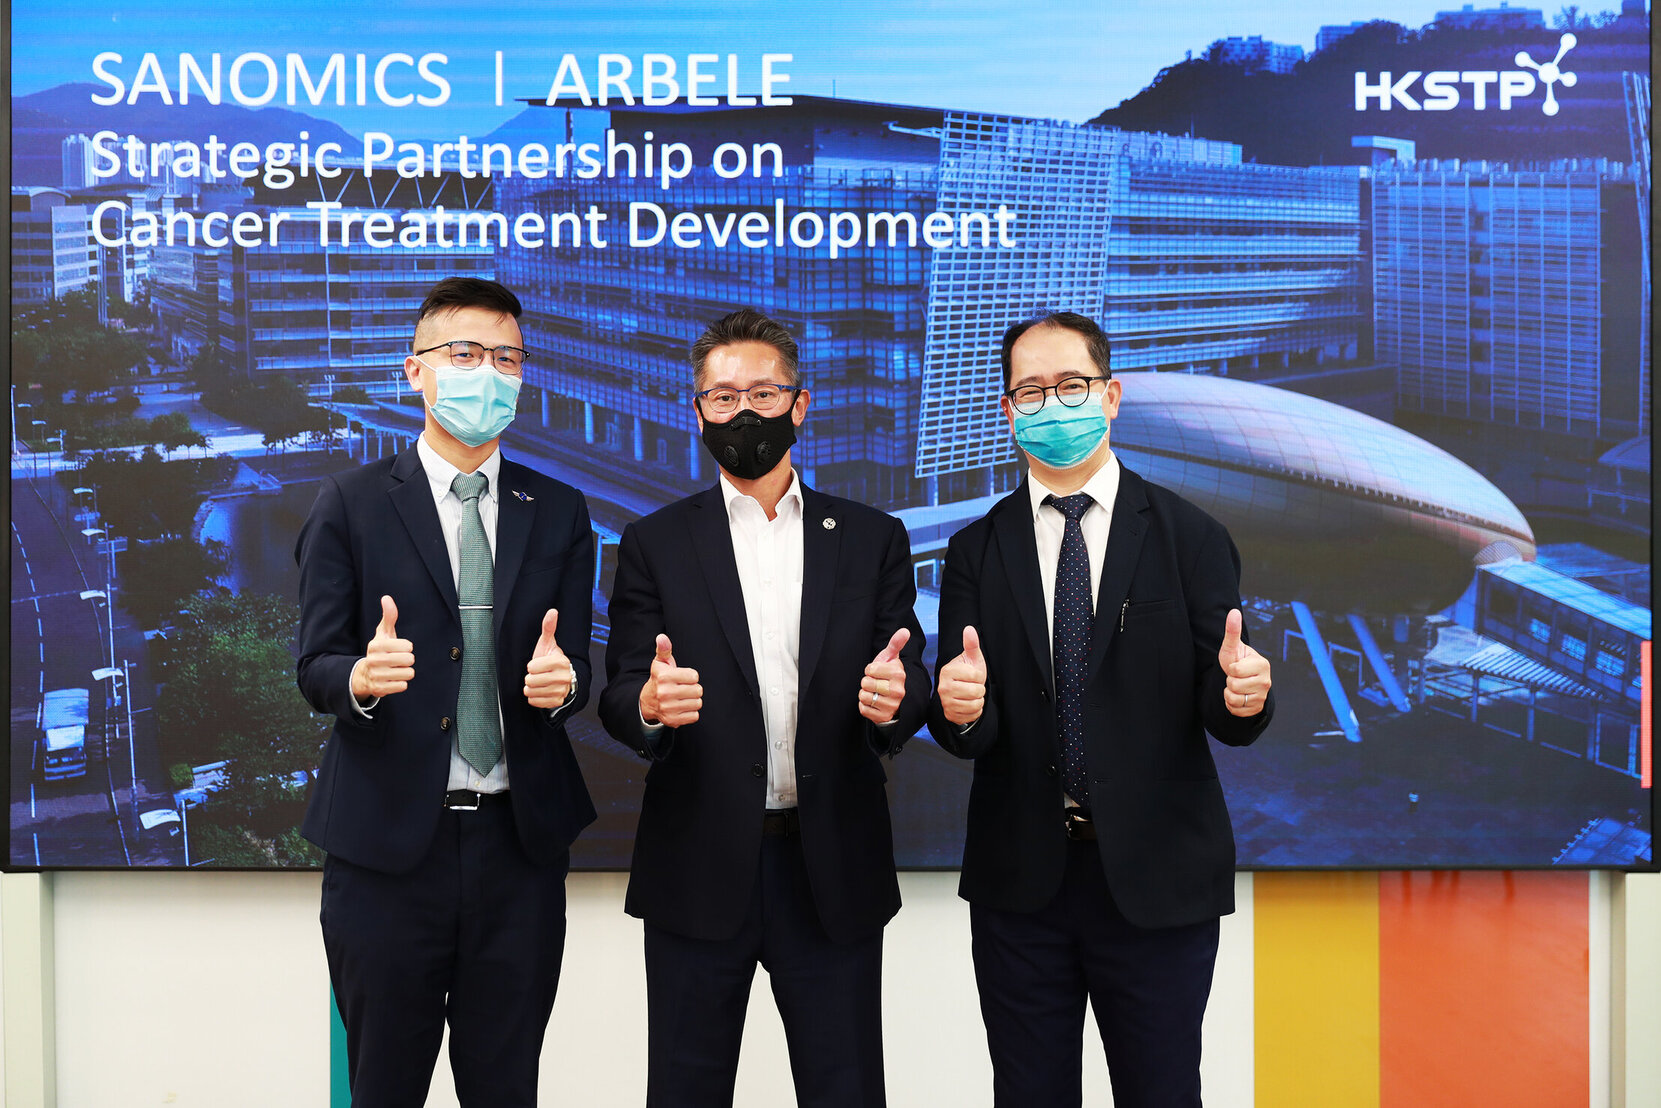 photo1HKSTP BIOTECHNOLOGY COMPANIES SANOMICS AND ARBELE ENTER INTO A STRATEGIC PARTNERSHIP TO ACCELE